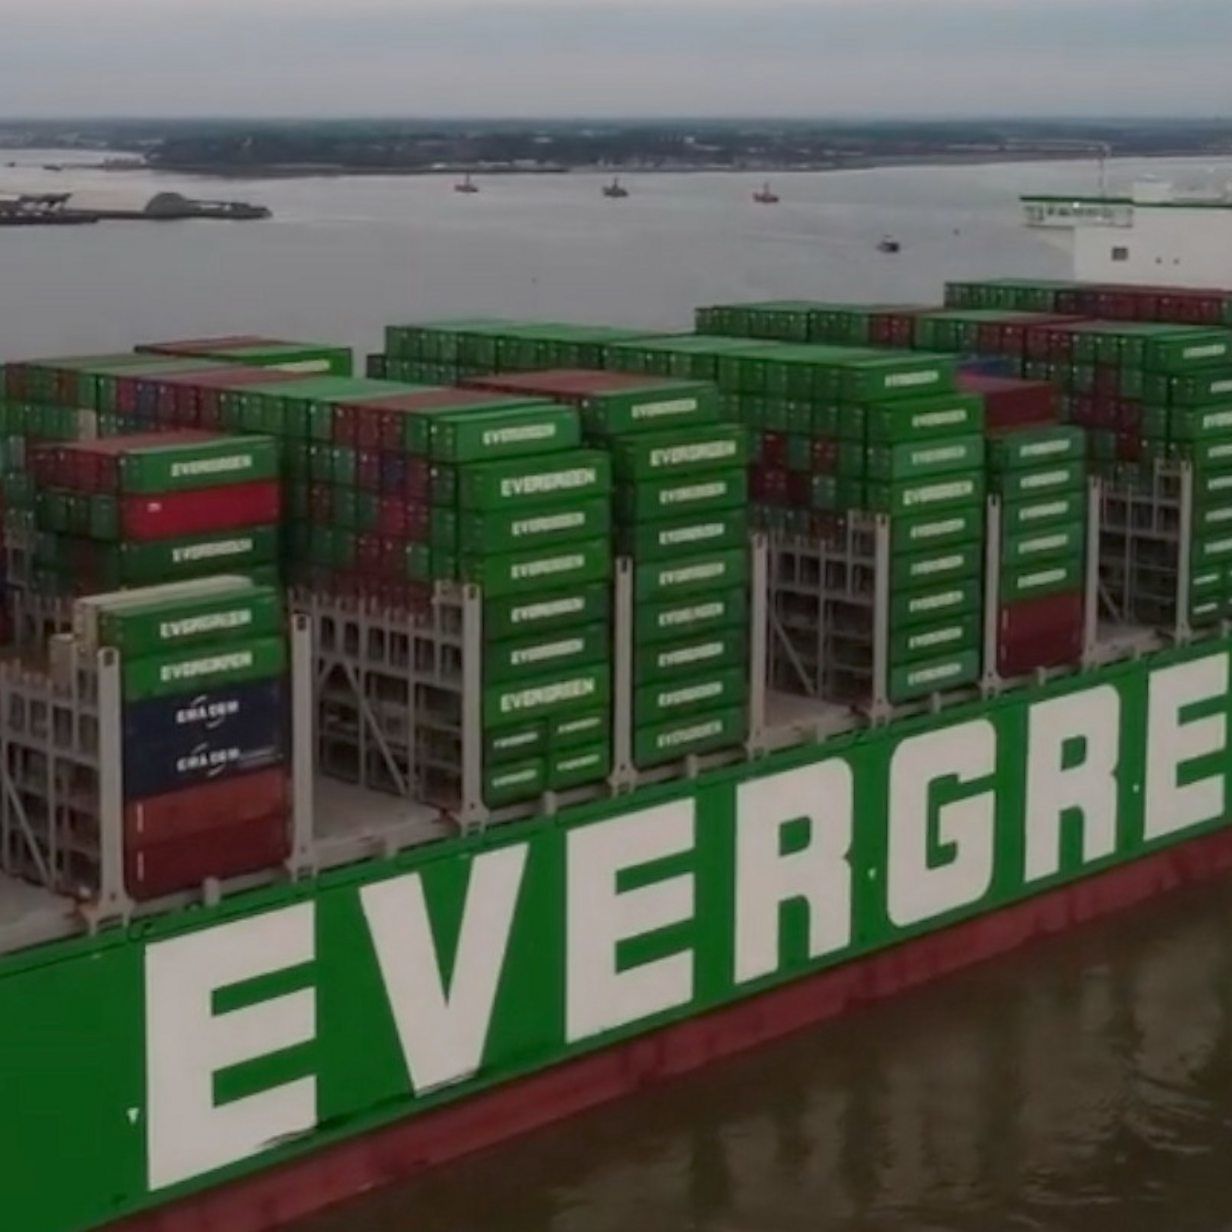 Drone captures arrival of largest container ship